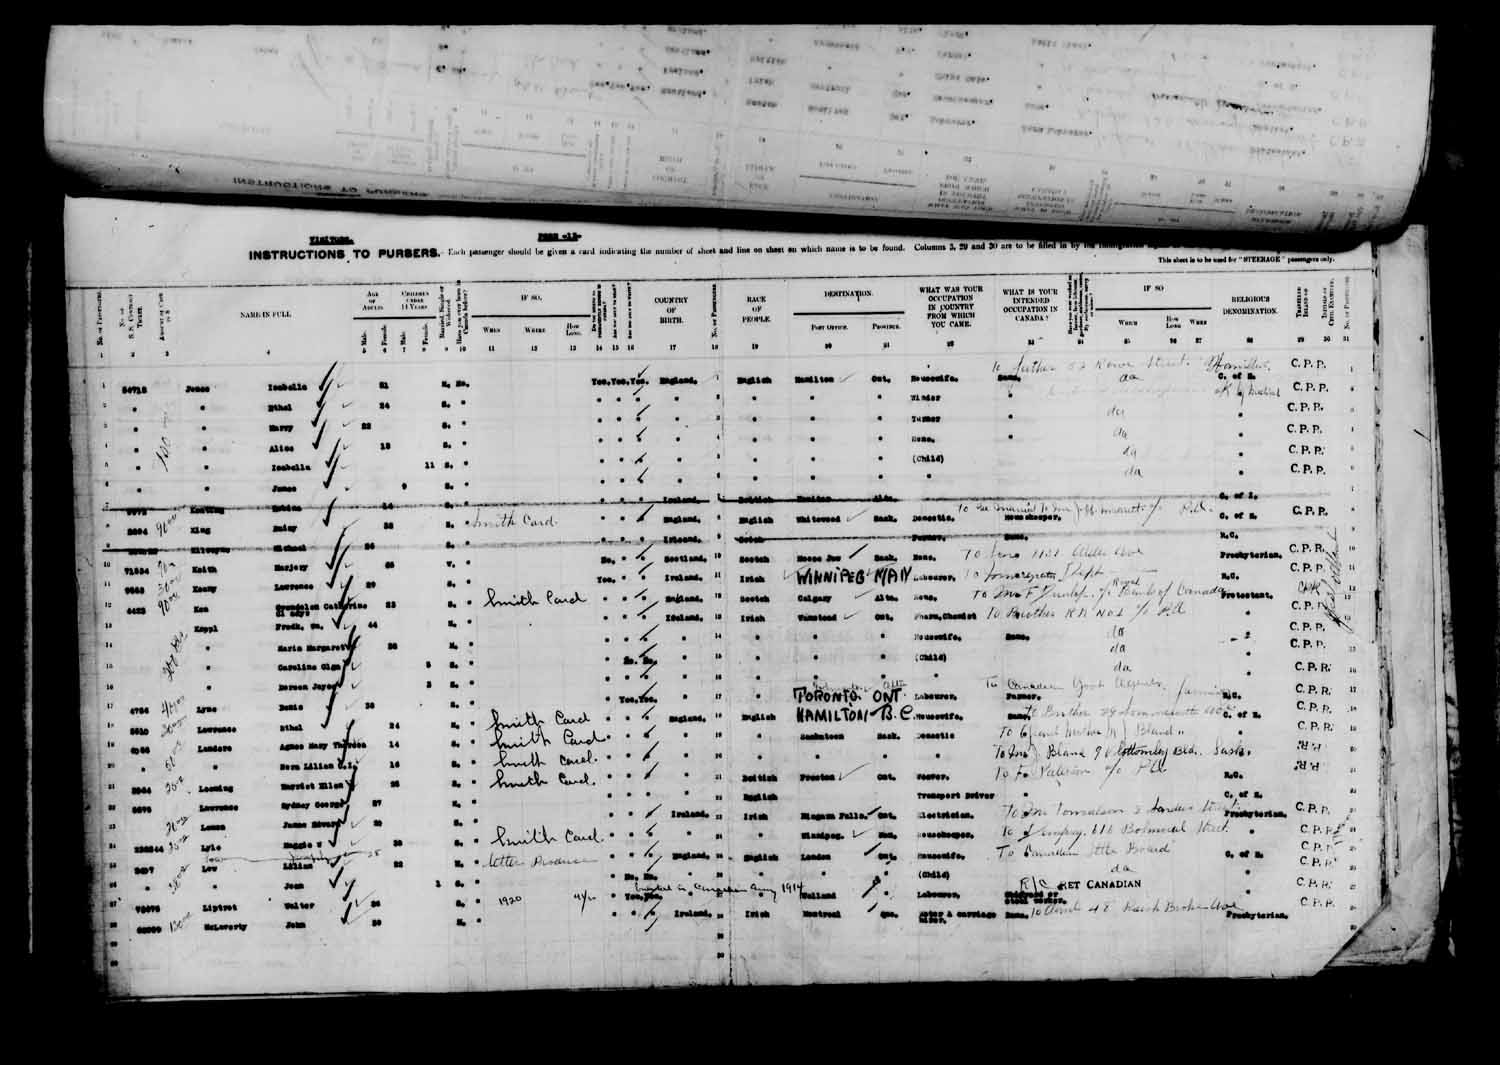 Digitized page of Passenger Lists for Image No.: e003610653